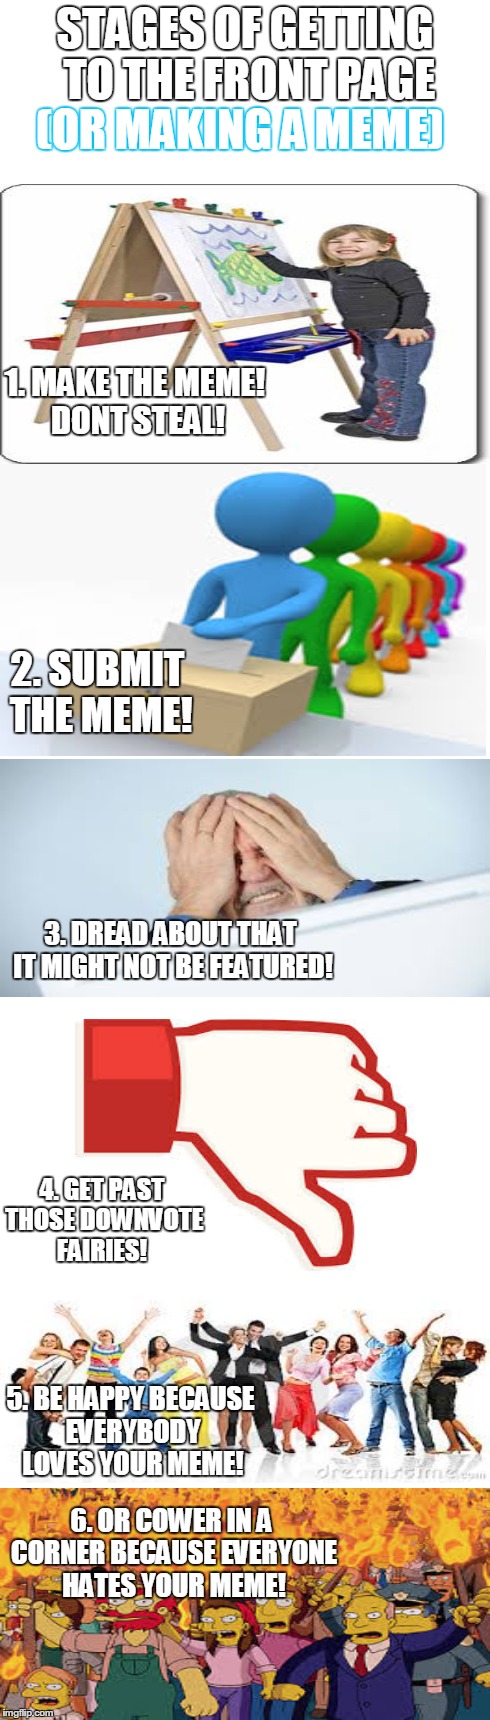 I was bored so I made this | STAGES OF GETTING TO THE FRONT PAGE (OR MAKING A MEME) 1. MAKE THE MEME! DONT STEAL! 2. SUBMIT THE MEME! 3. DREAD ABOUT THAT IT MIGHT NOT BE | image tagged in funny,advice,memes,story,repost,babes | made w/ Imgflip meme maker